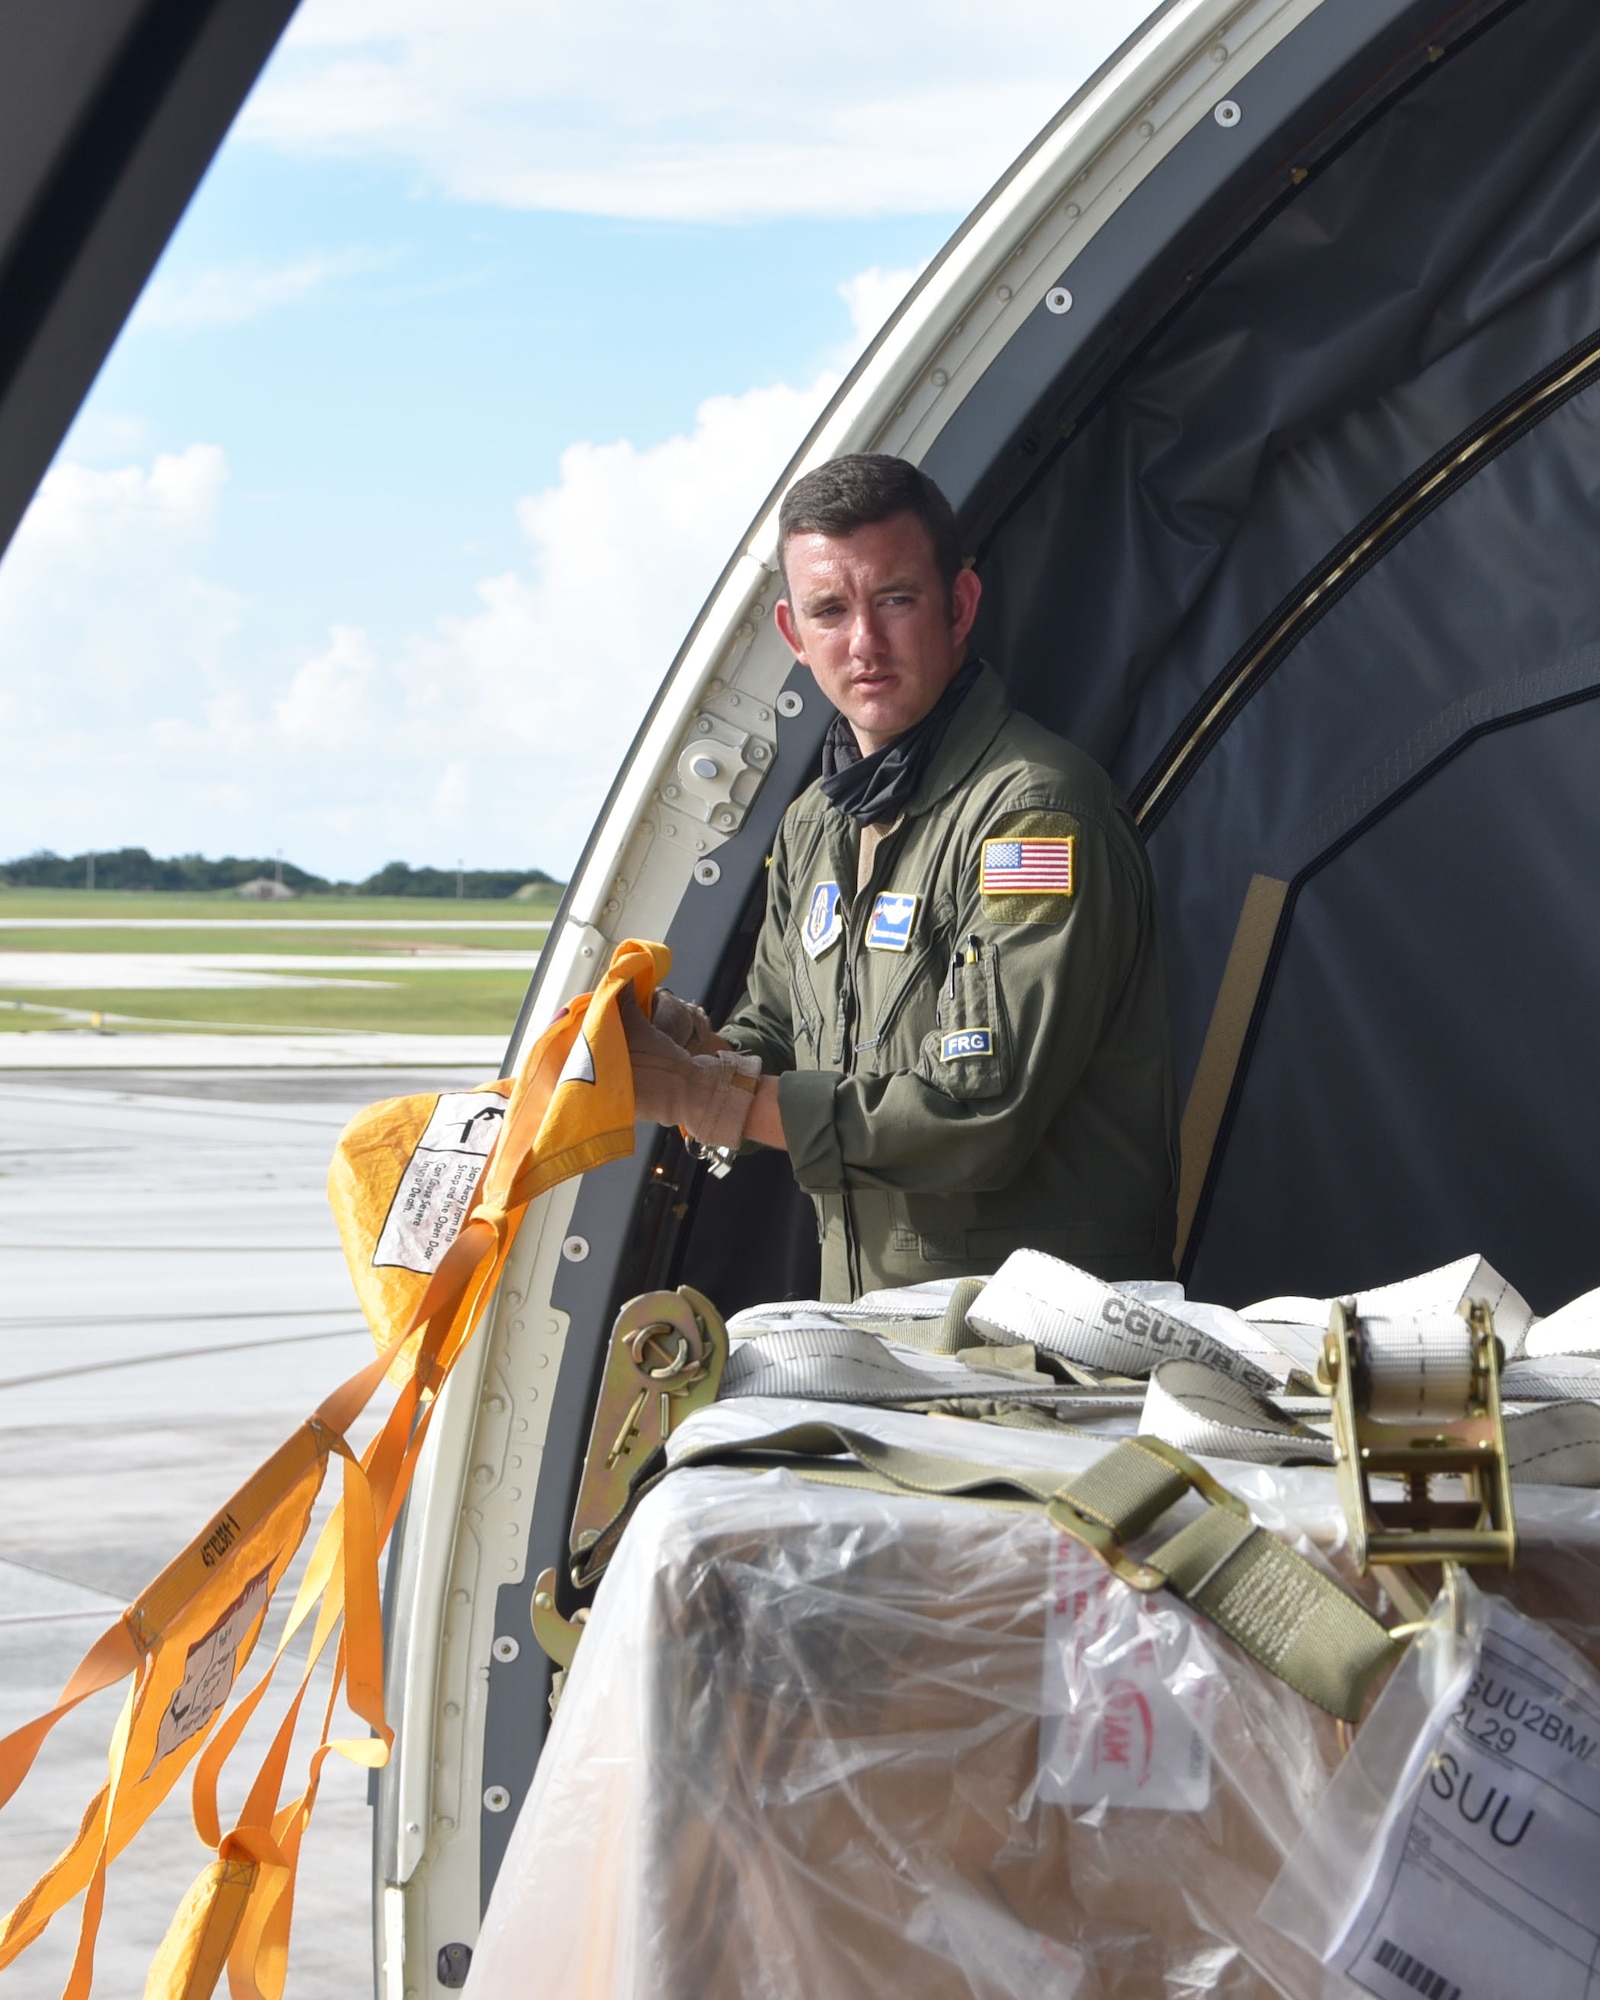 Senior Master Sgt. Aaron McLaughlin, 18th Air Refueling Squadron boom operator and load master, surveys a cargo pallet received from Andersen Air Force Base, Guam, Aug. 20, 2020, at Guam, AB. Transporting people and equipment on Air Force assets takes planning and preparation.  McLaughlin was part of a McConnell Reserve-lead aircrew that flew to Travis; Joint Base Pearl Harbor-Hickam Air Force Base, Hawaii, Andersen Air Force Base, Guam, and Royal Australian Air Force Base, Richmond, New South Wales, Australia.